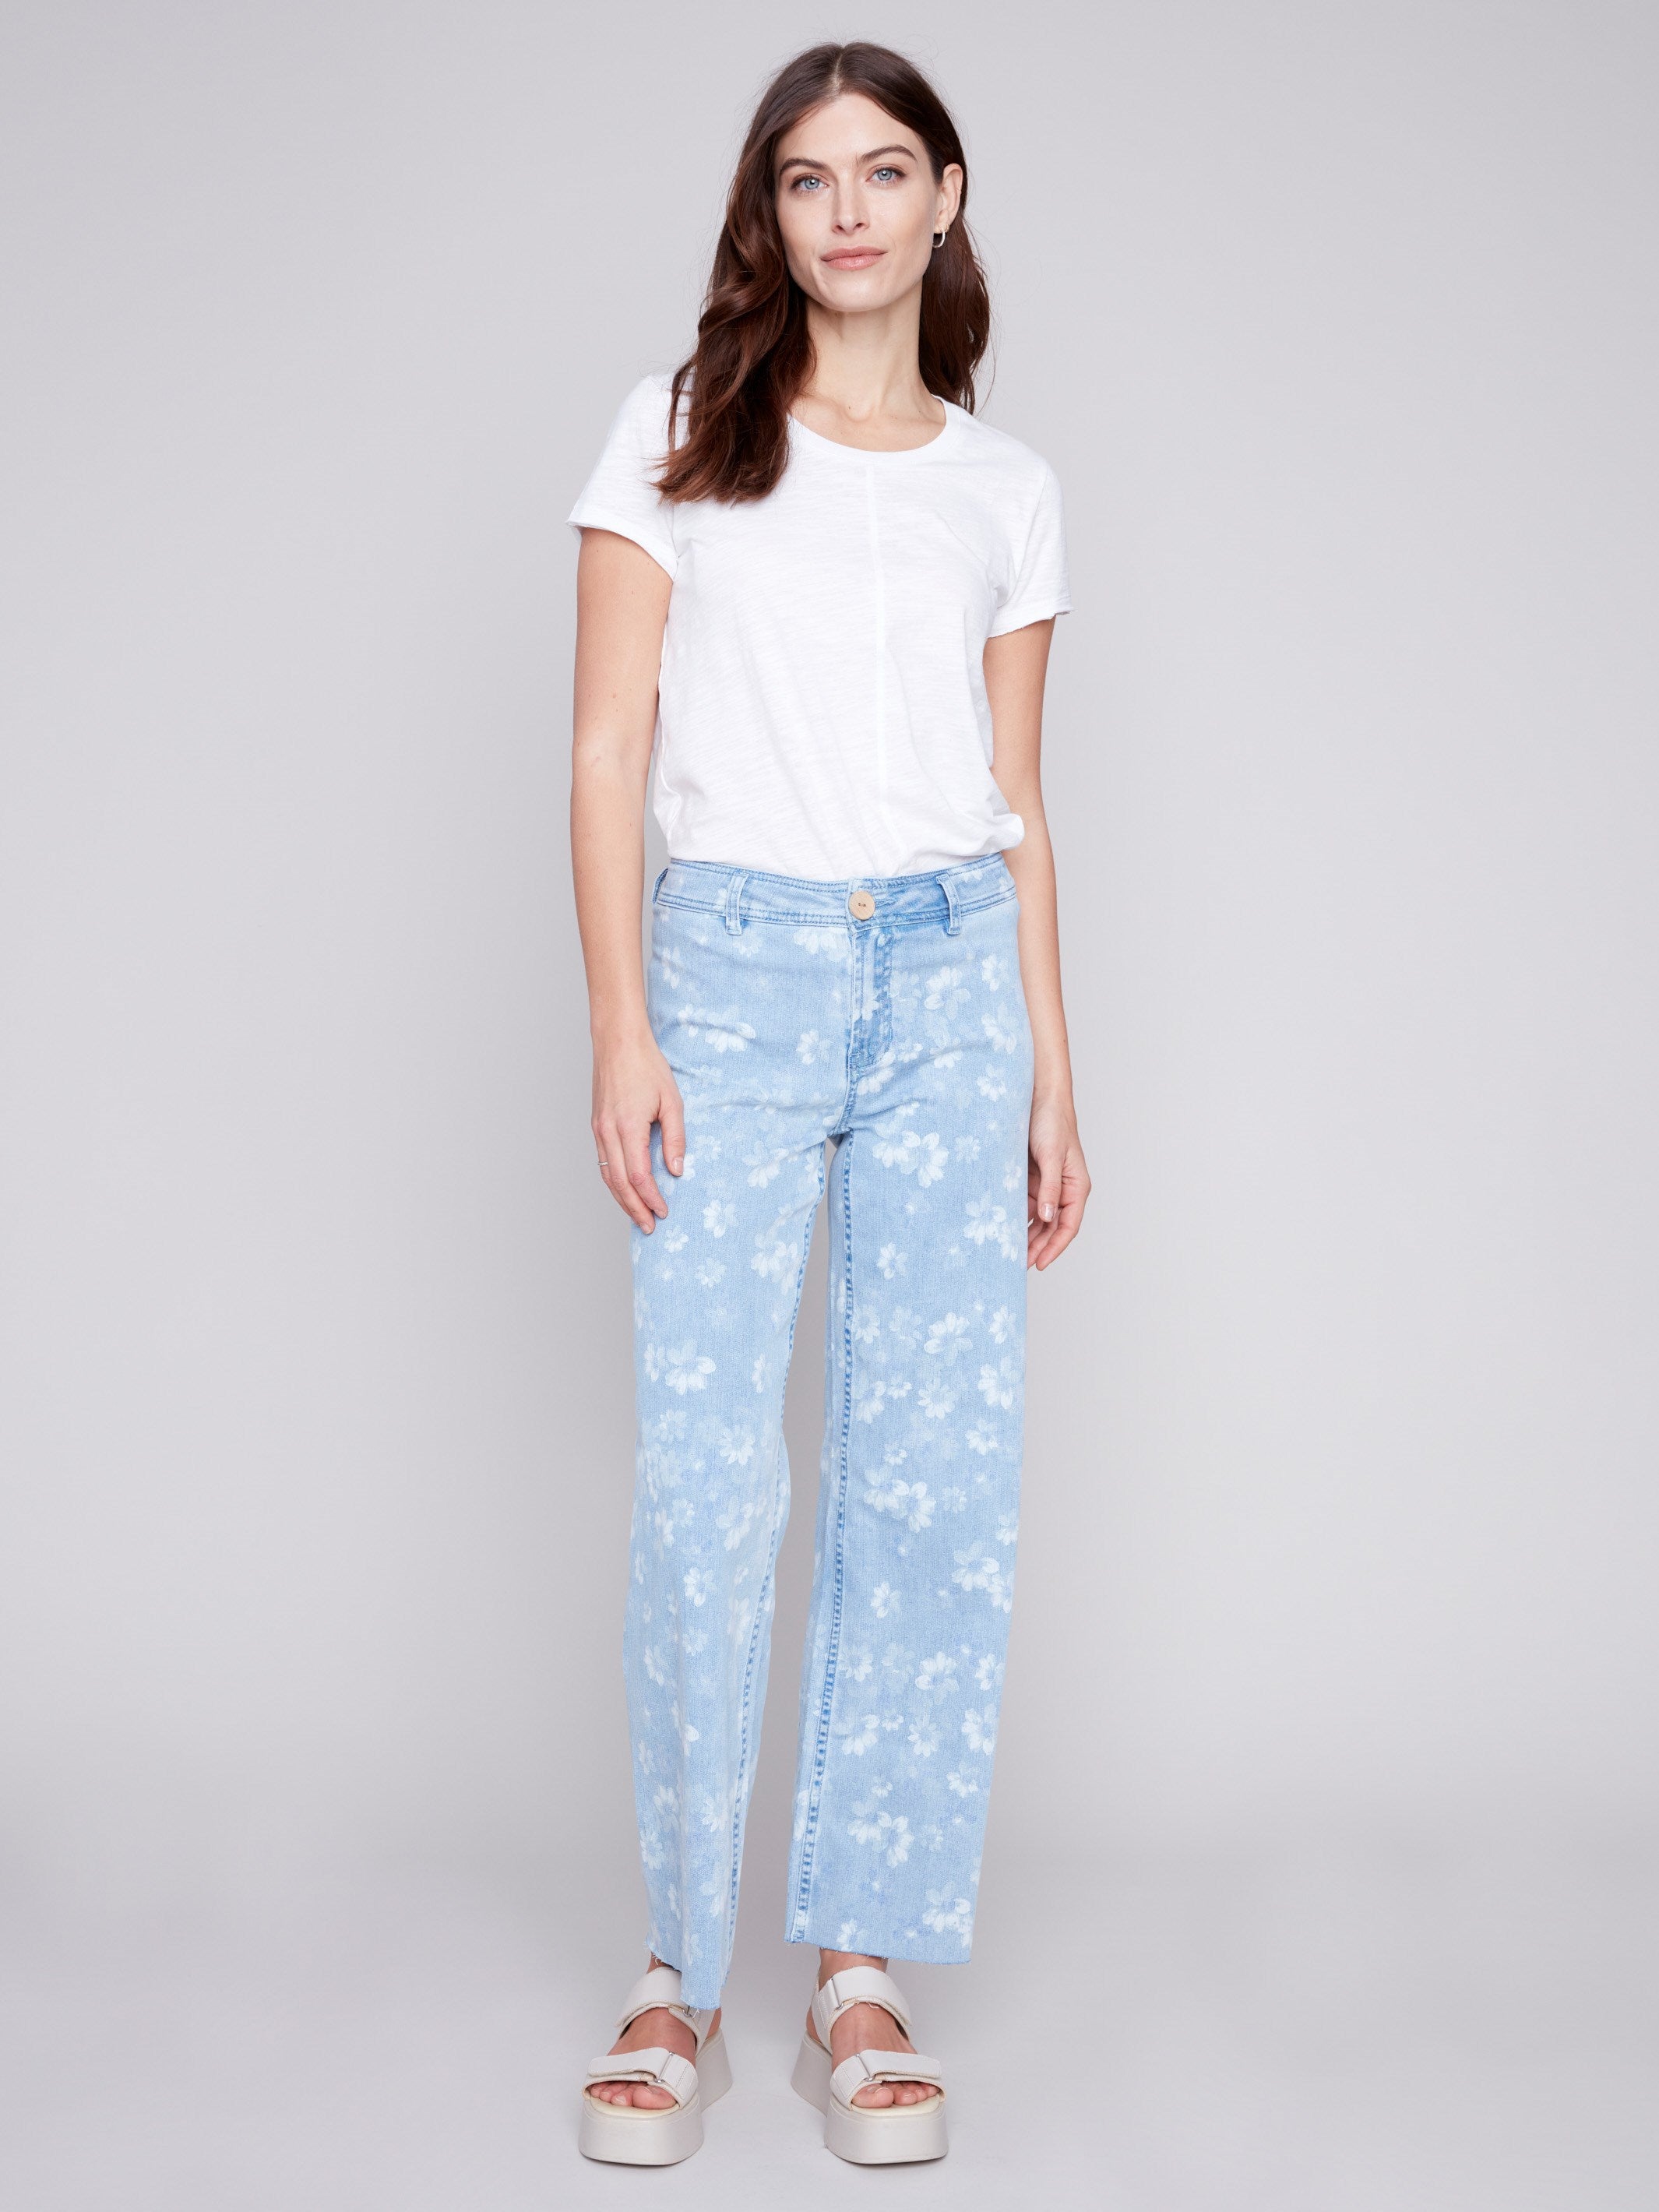 Printed Wide Leg Pants with Raw Hem - Daisy Blue - Charlie B Collection Canada - Image 4